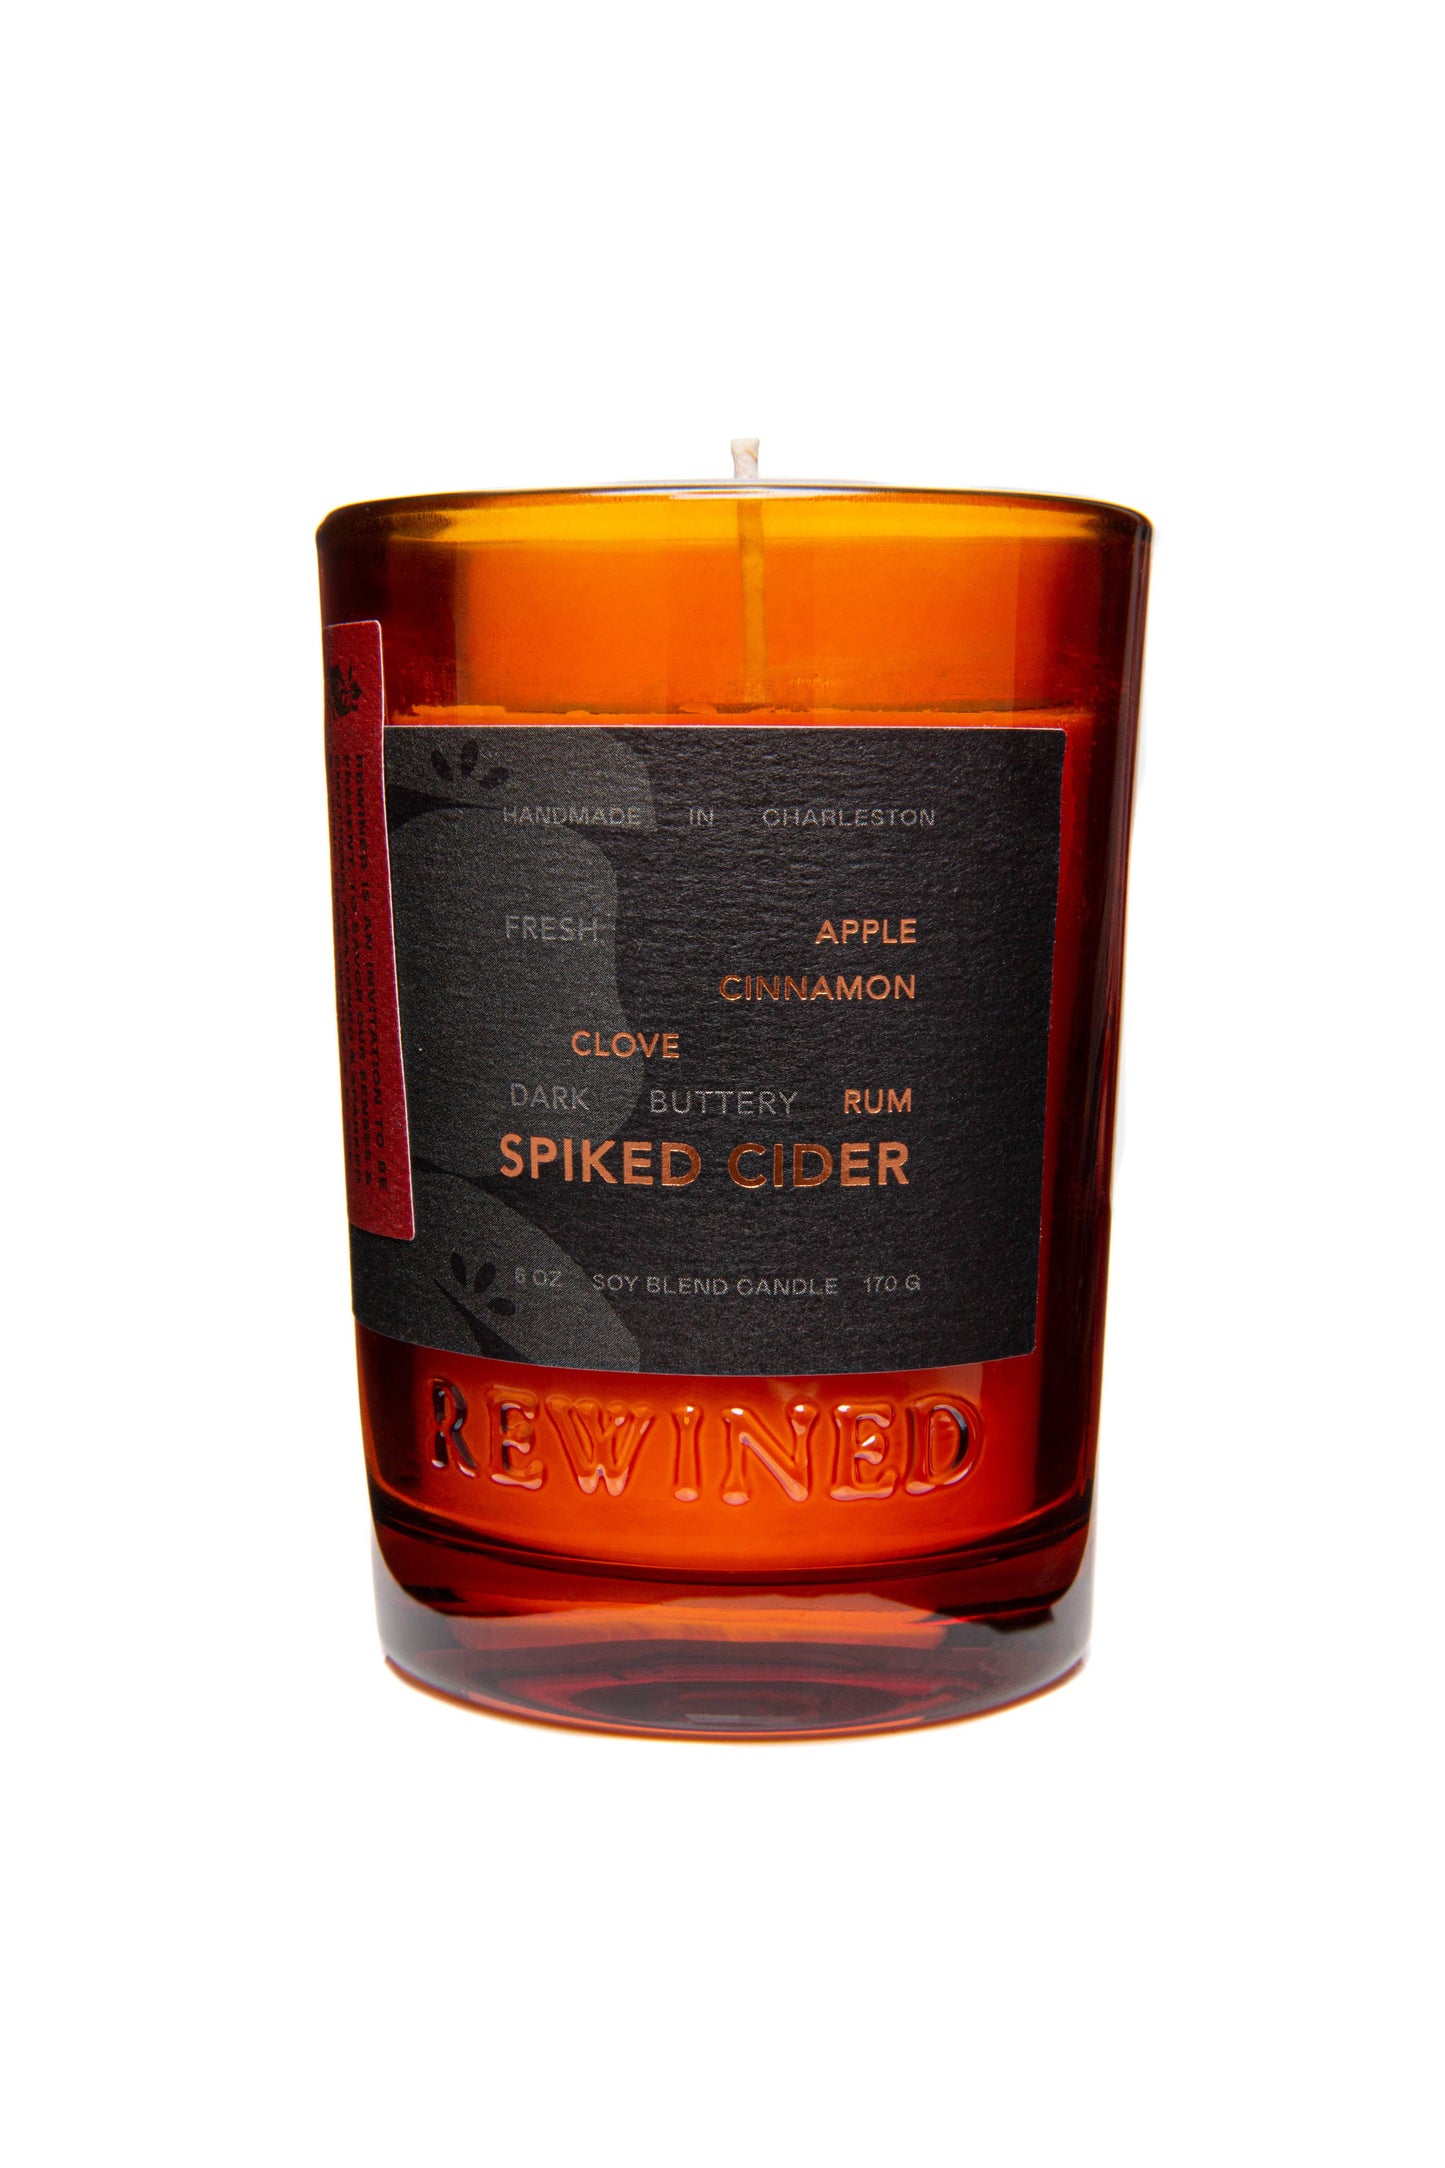 Rewined Spiked Cider Candle 6 oz